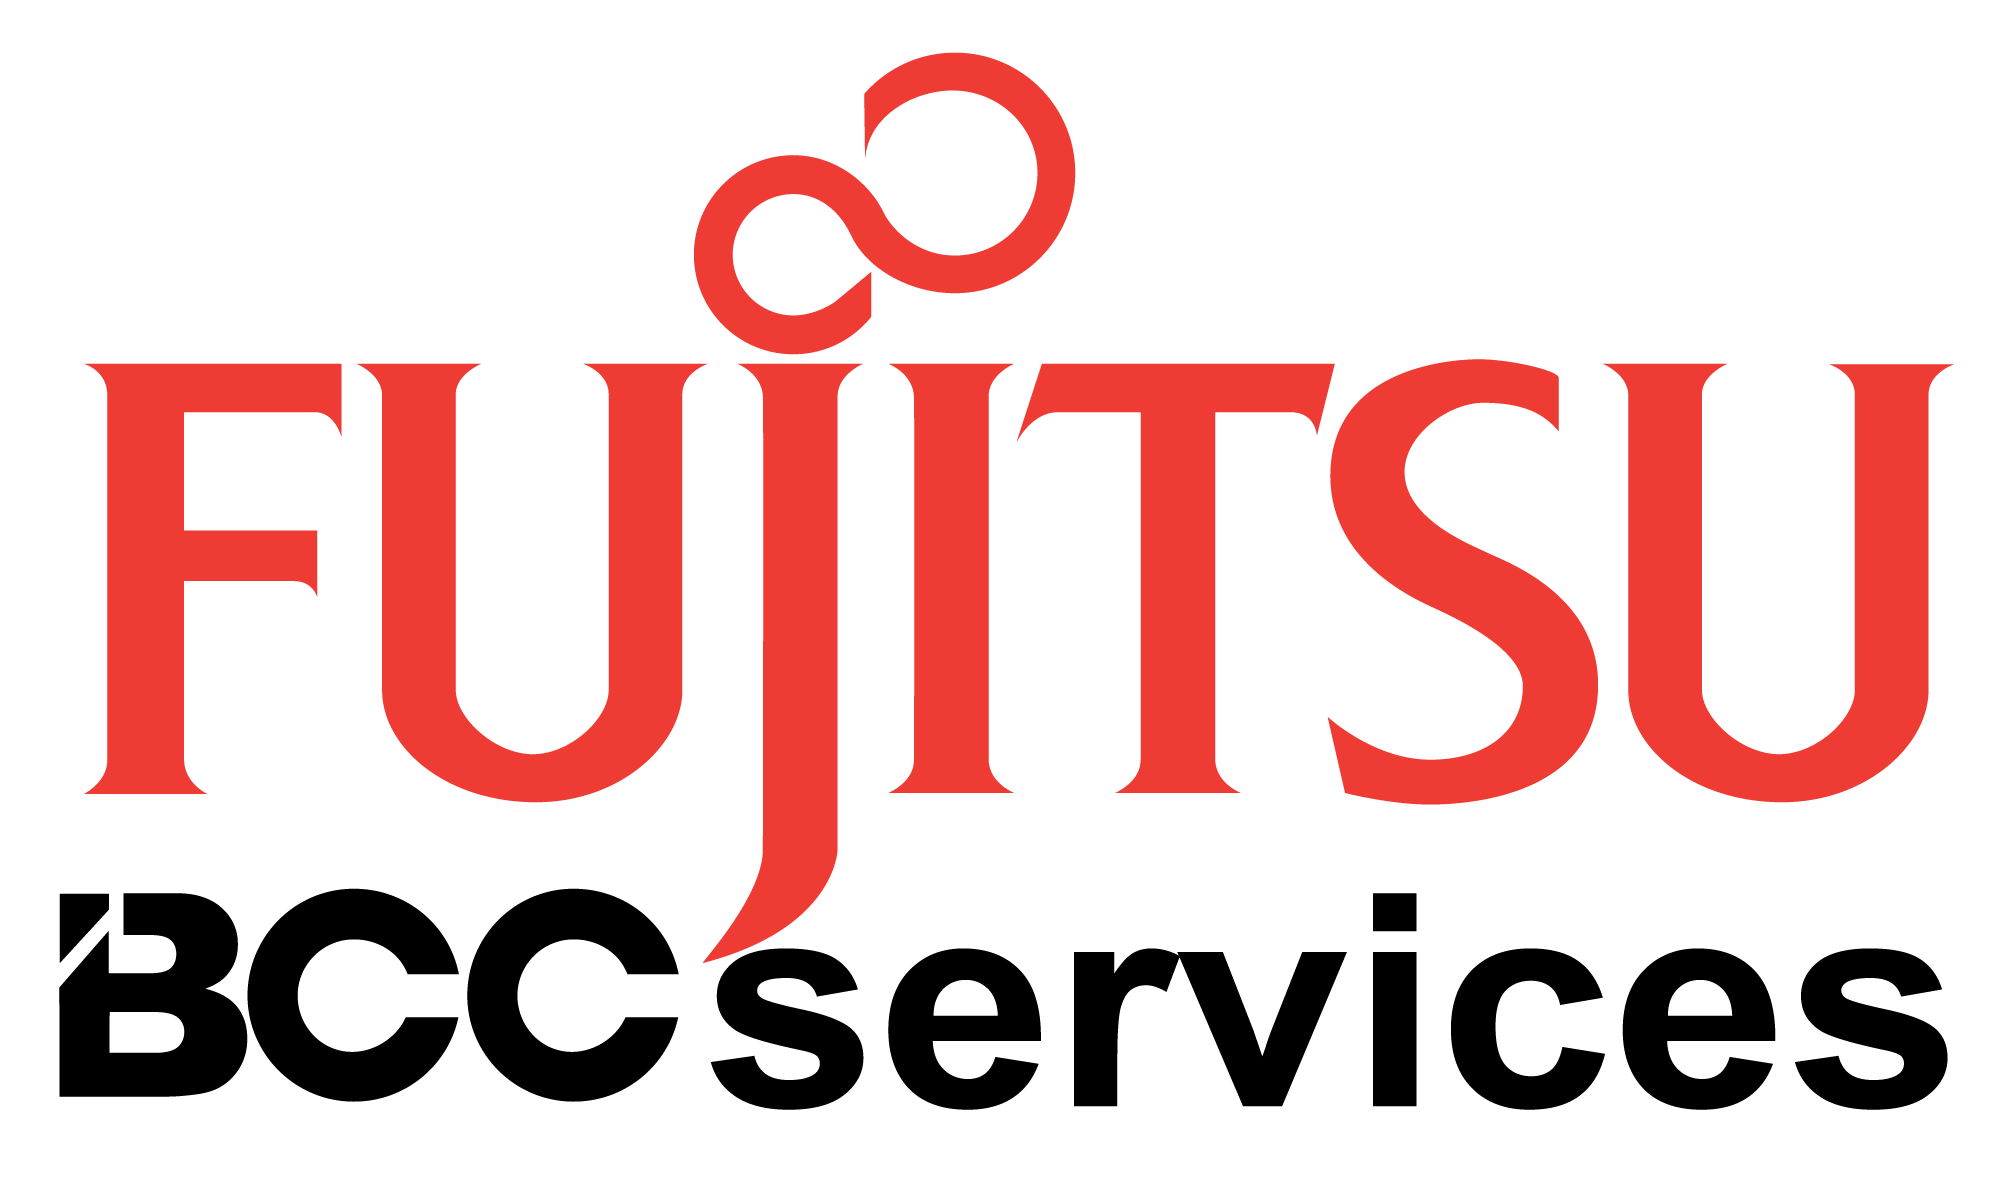 Fujitsu and BCC services combined logo